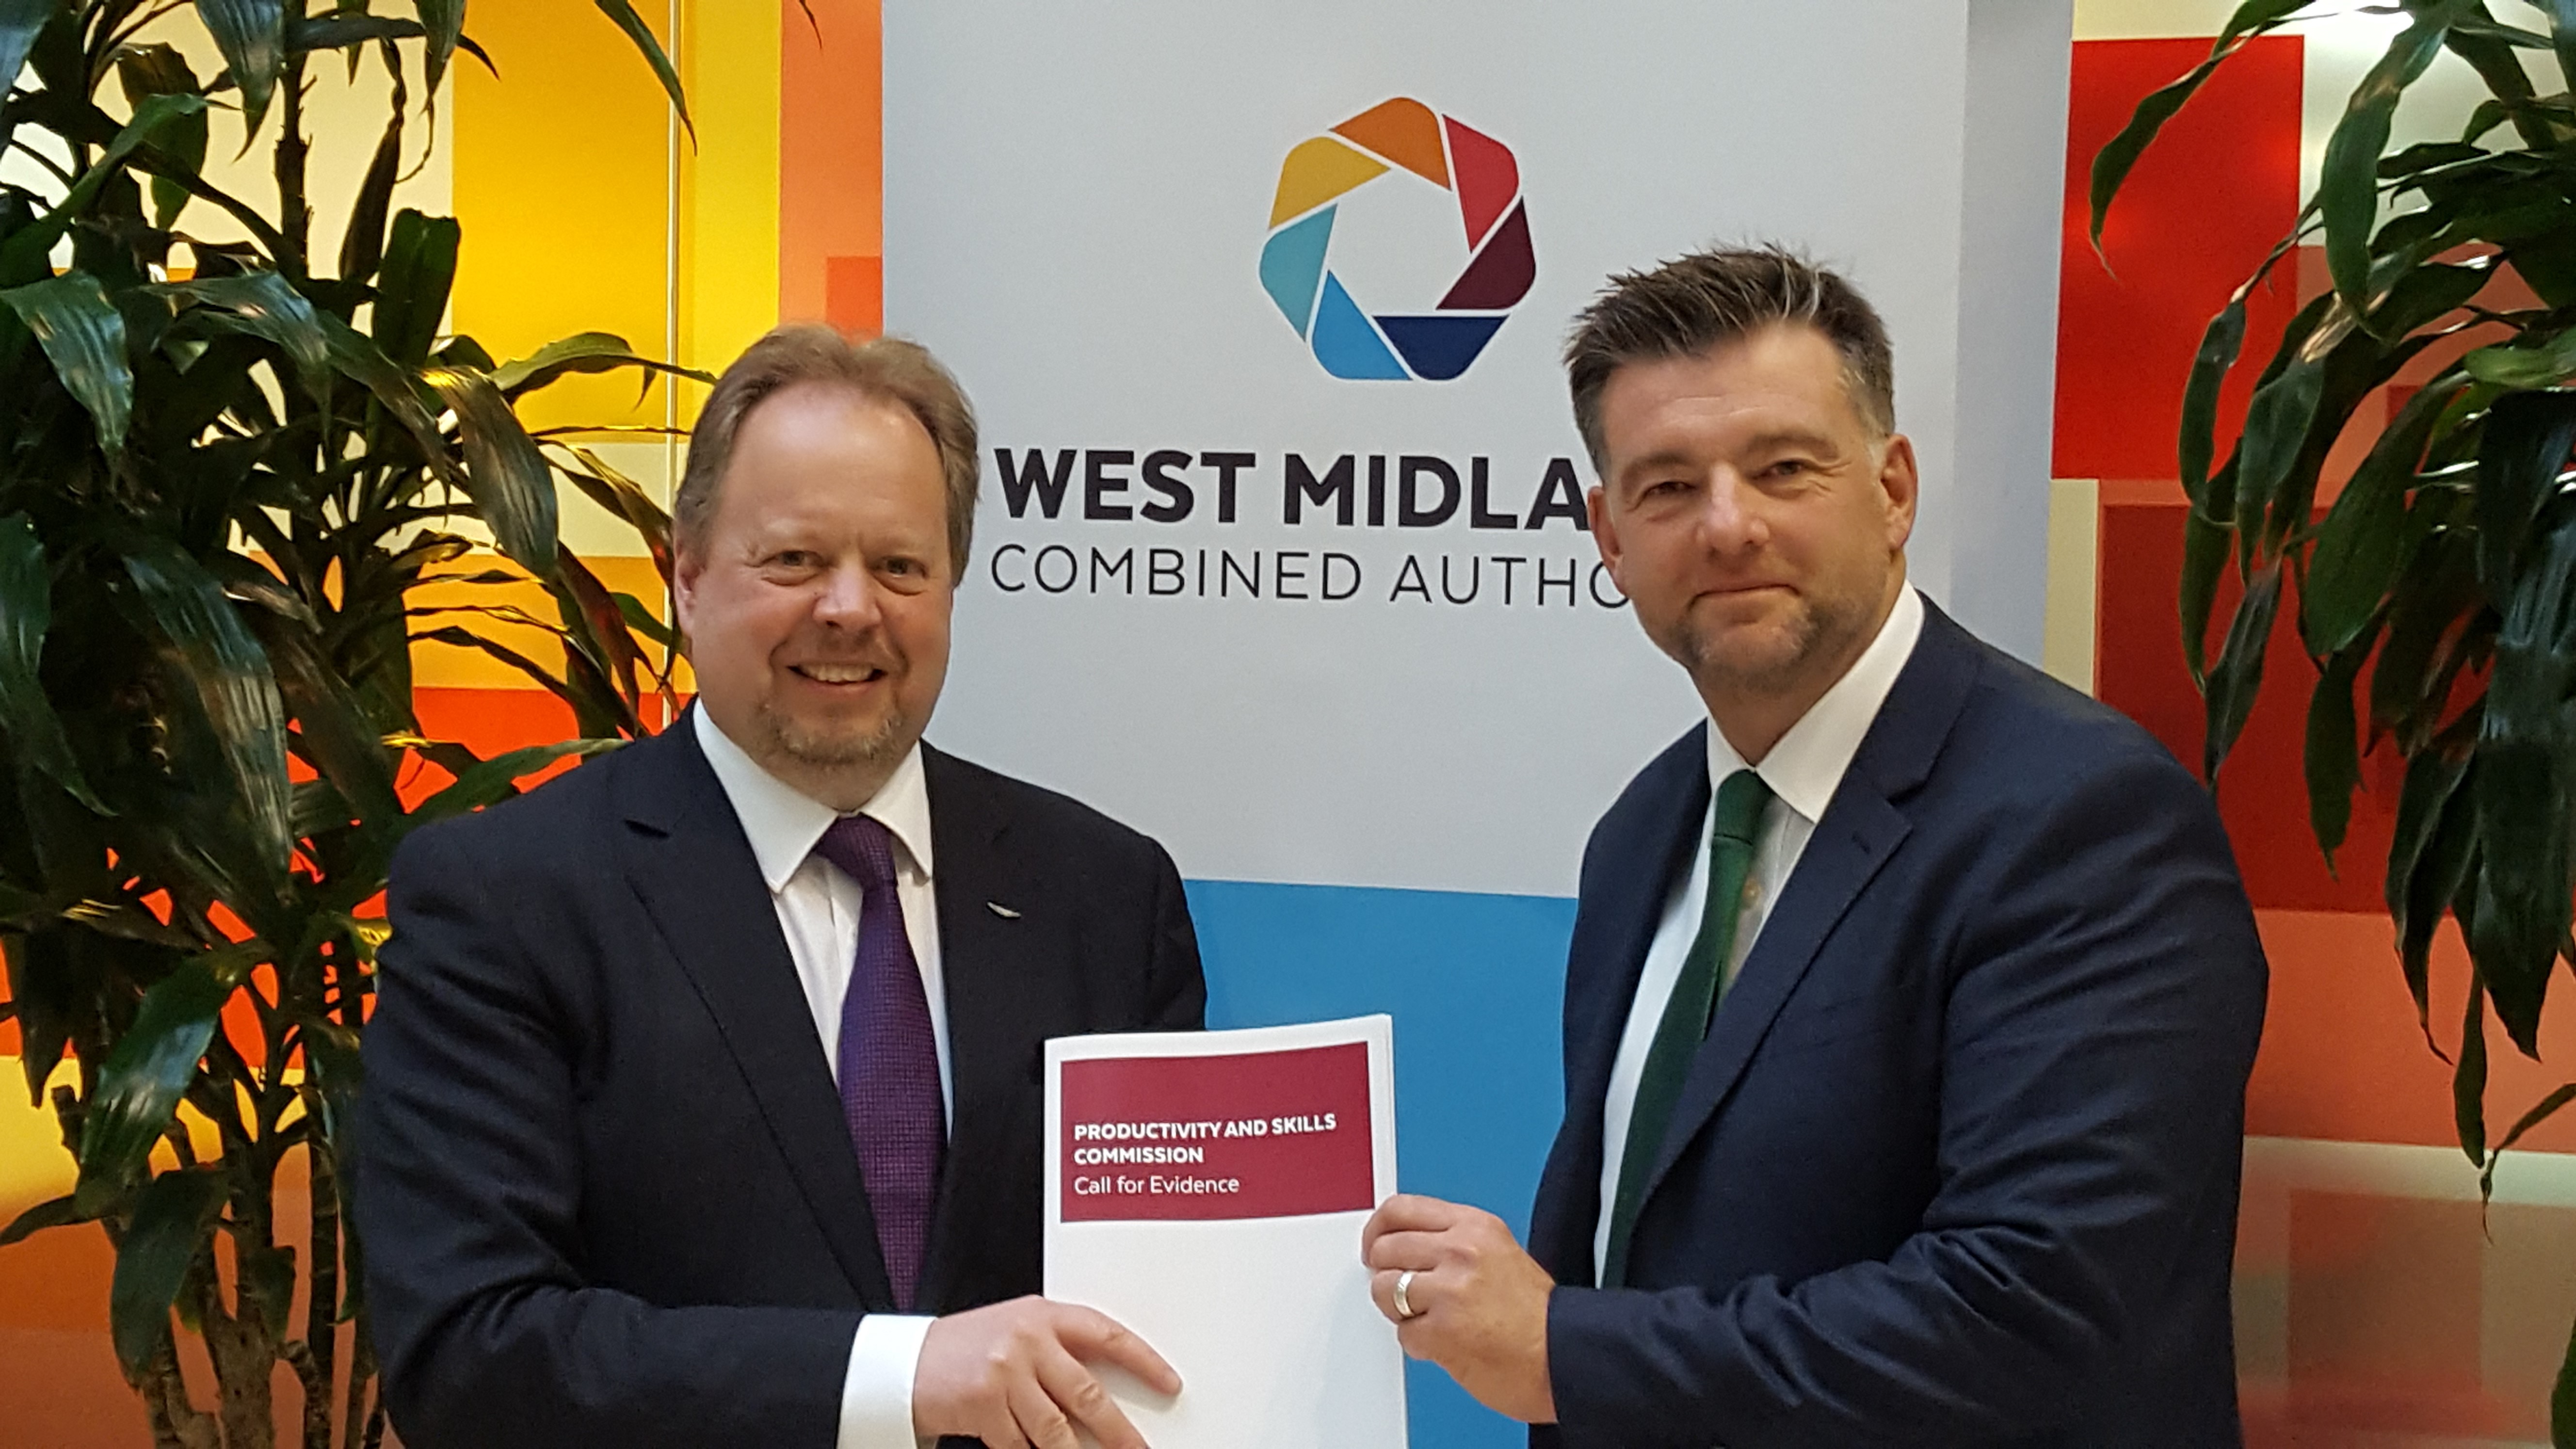 Dr Andy Palmer (left), president and chief executive of Aston Martin Lagonda and Nick Page, chief executive of Solihull Council, launch the new West Midlands Combined Authority’s Productivity and Skills Commission